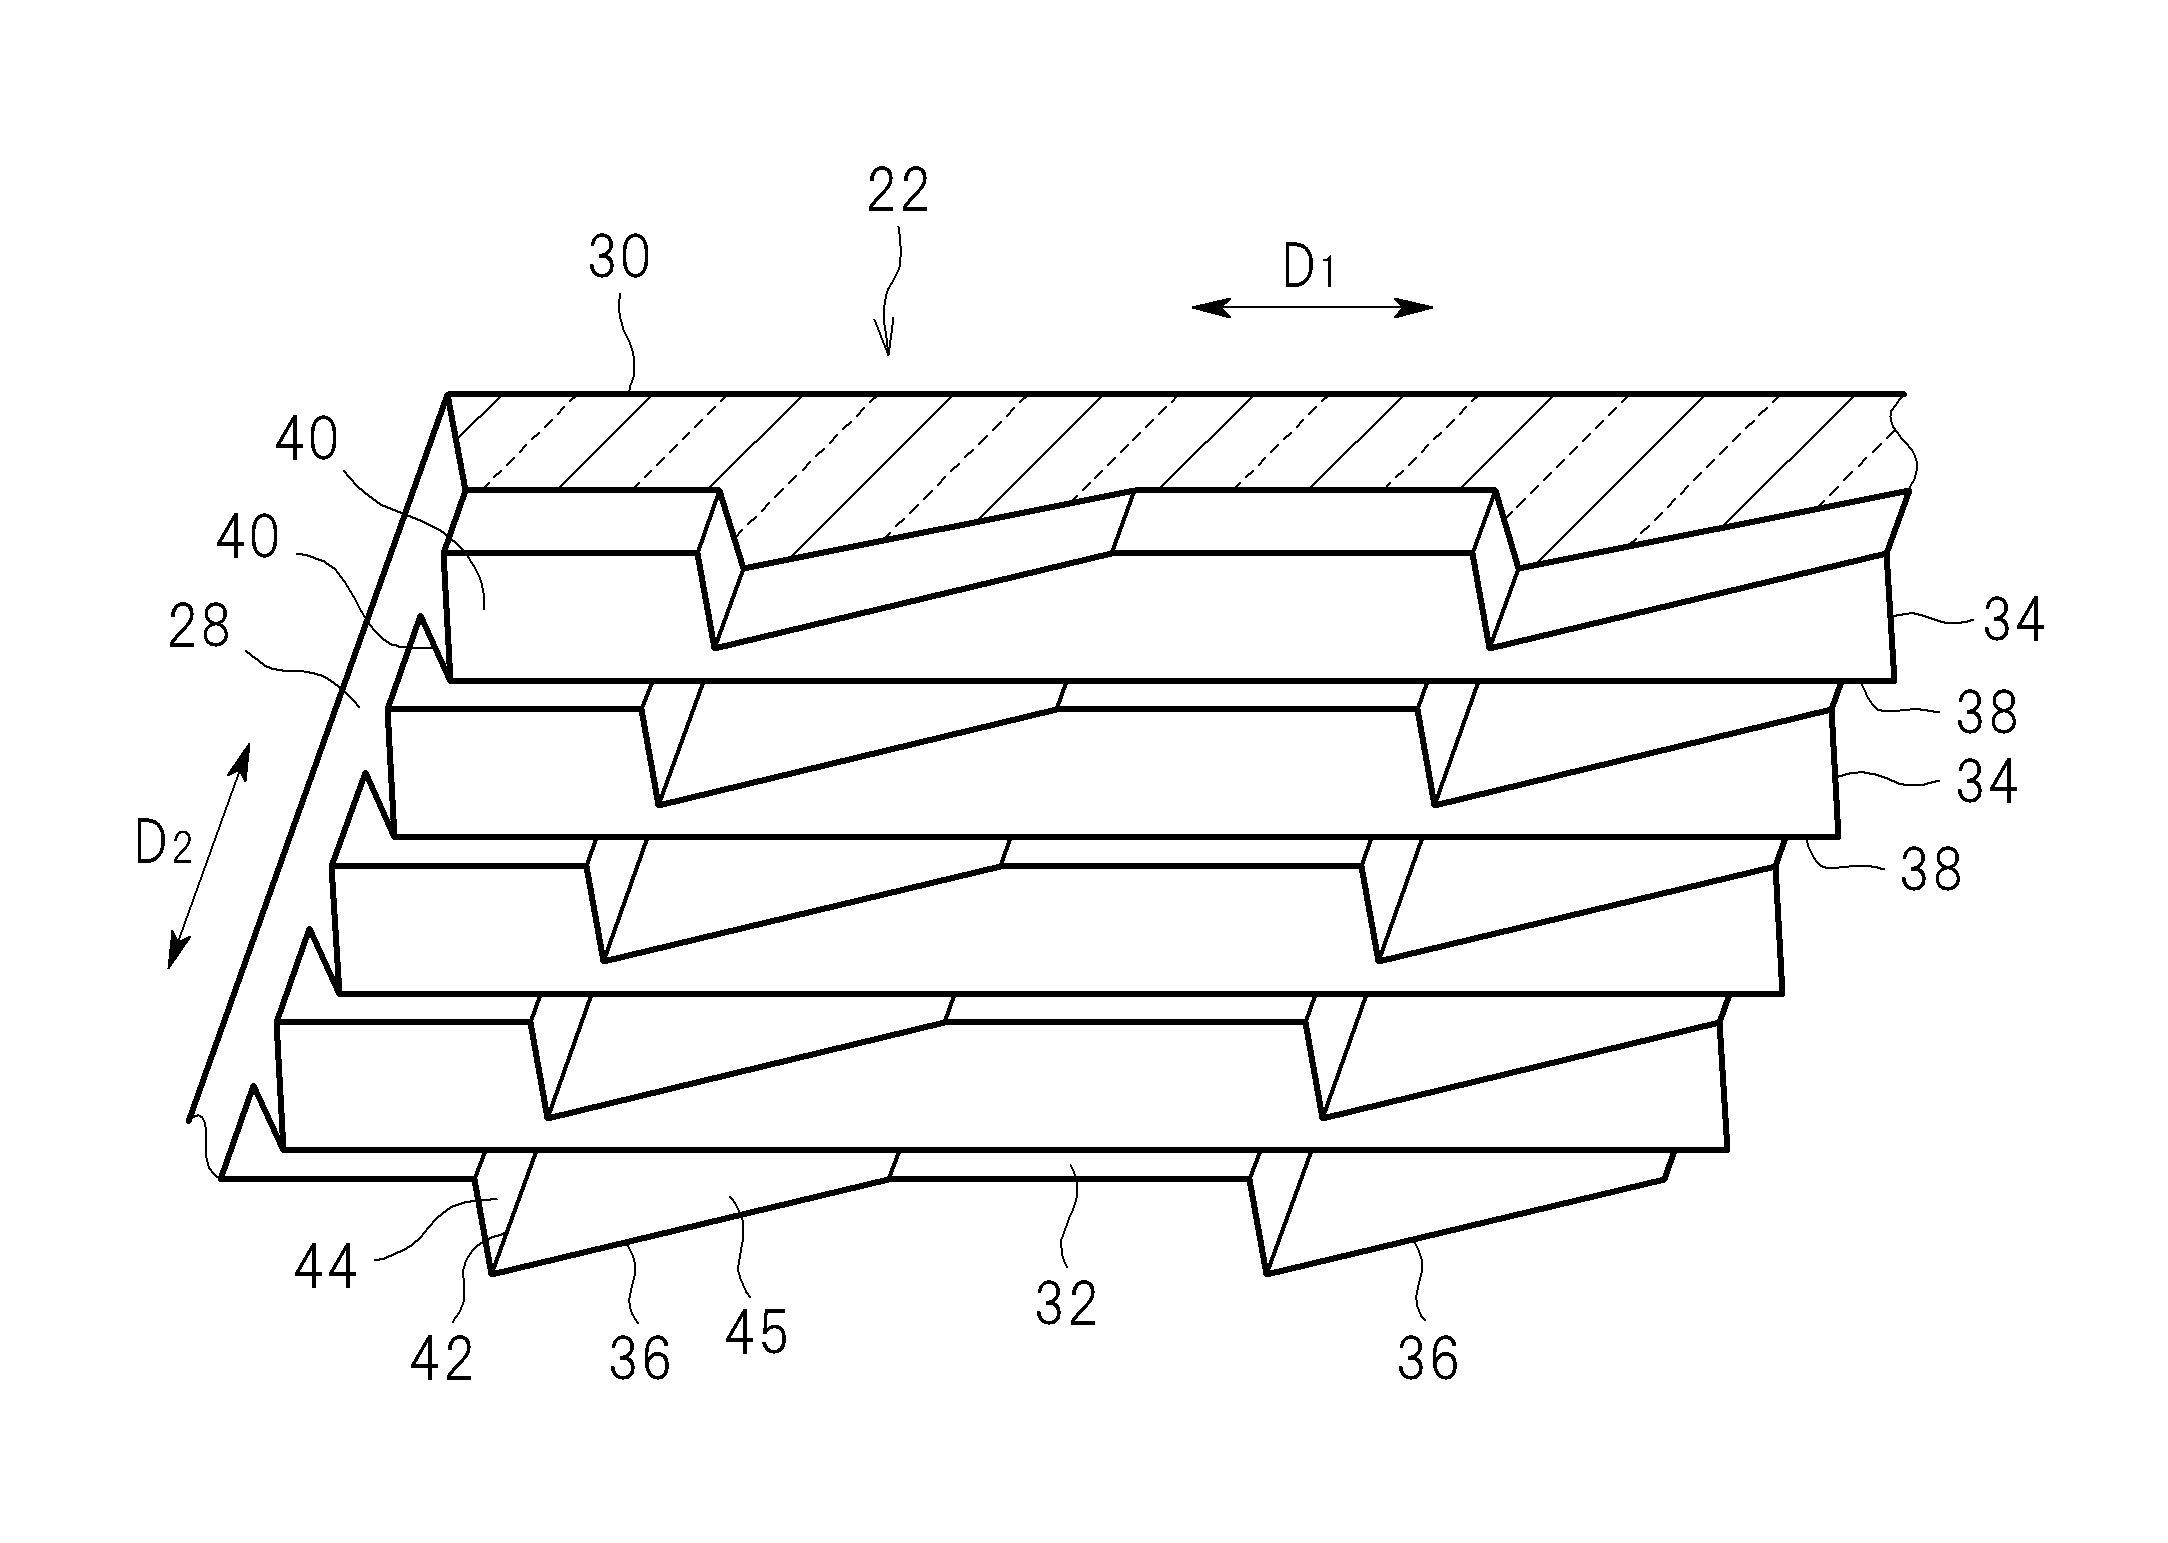 Liquid crystal display device using light guide plate